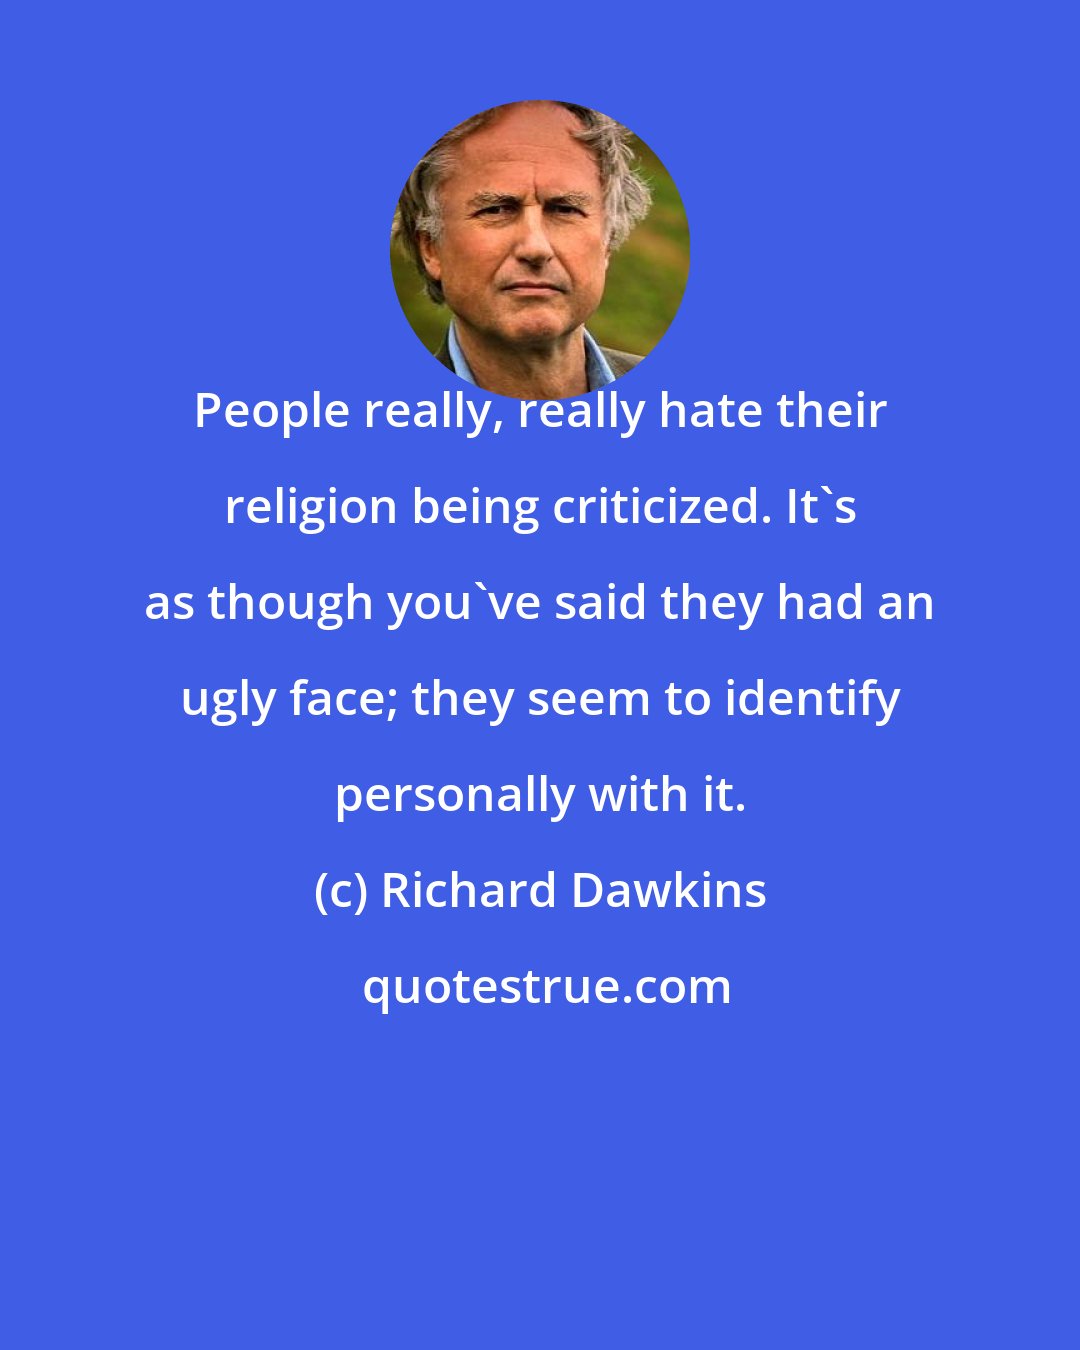 Richard Dawkins: People really, really hate their religion being criticized. It's as though you've said they had an ugly face; they seem to identify personally with it.